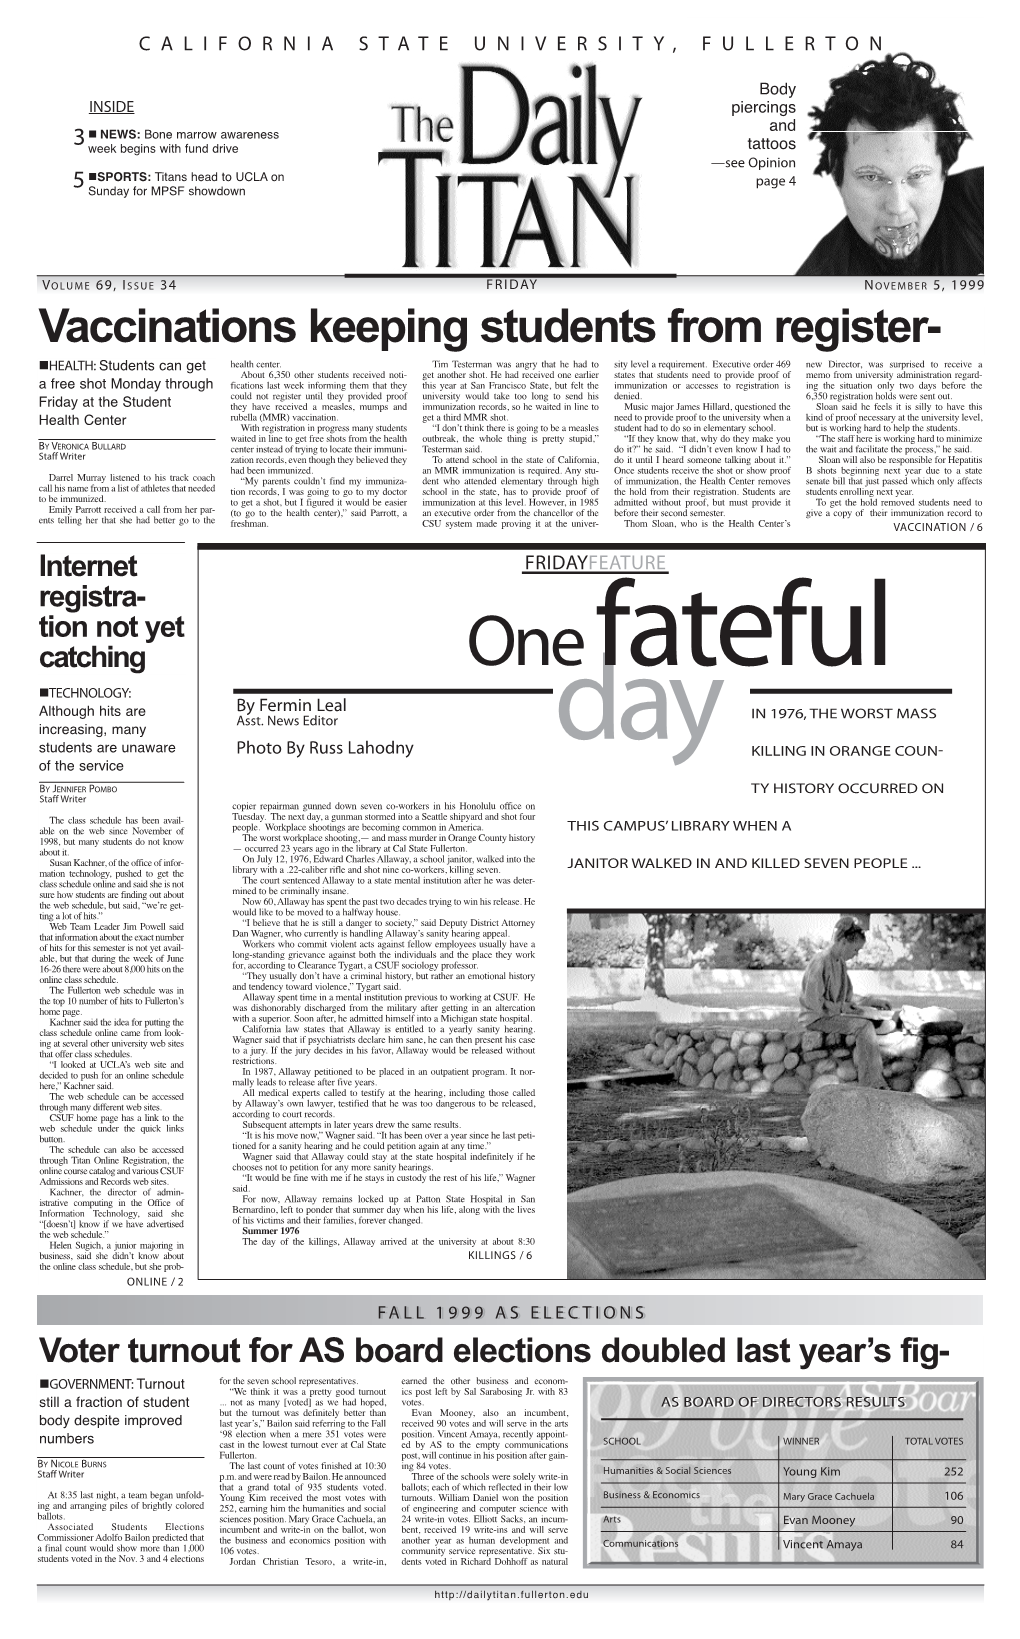 Vaccinations Keeping Students from Register- Nhealth: Students Can Get Health Center